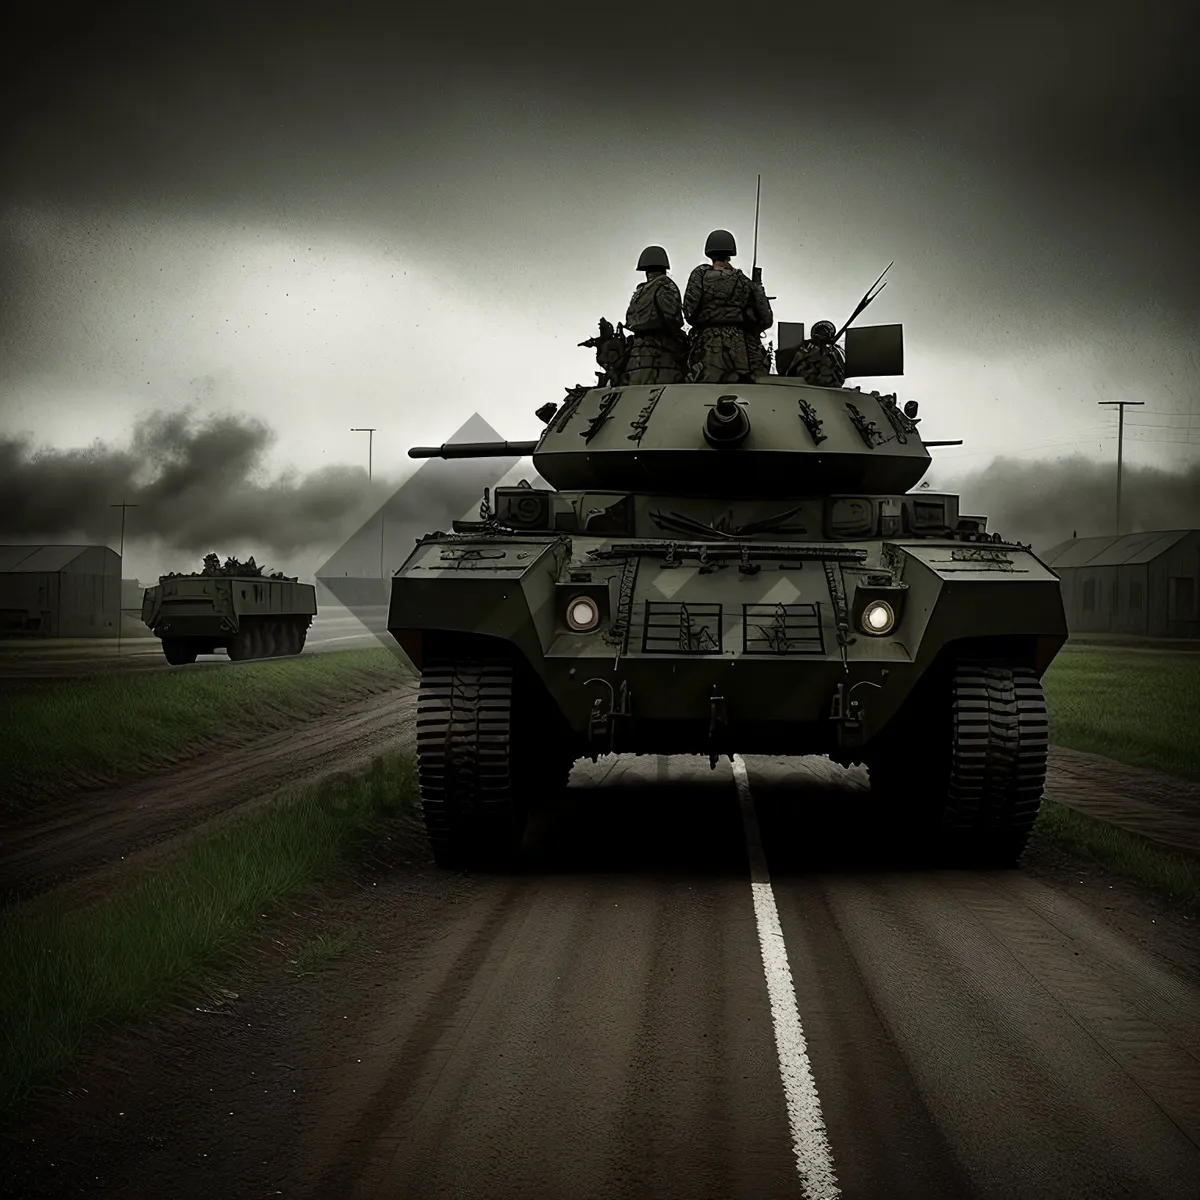 Picture of Armored Military Tank on the Road